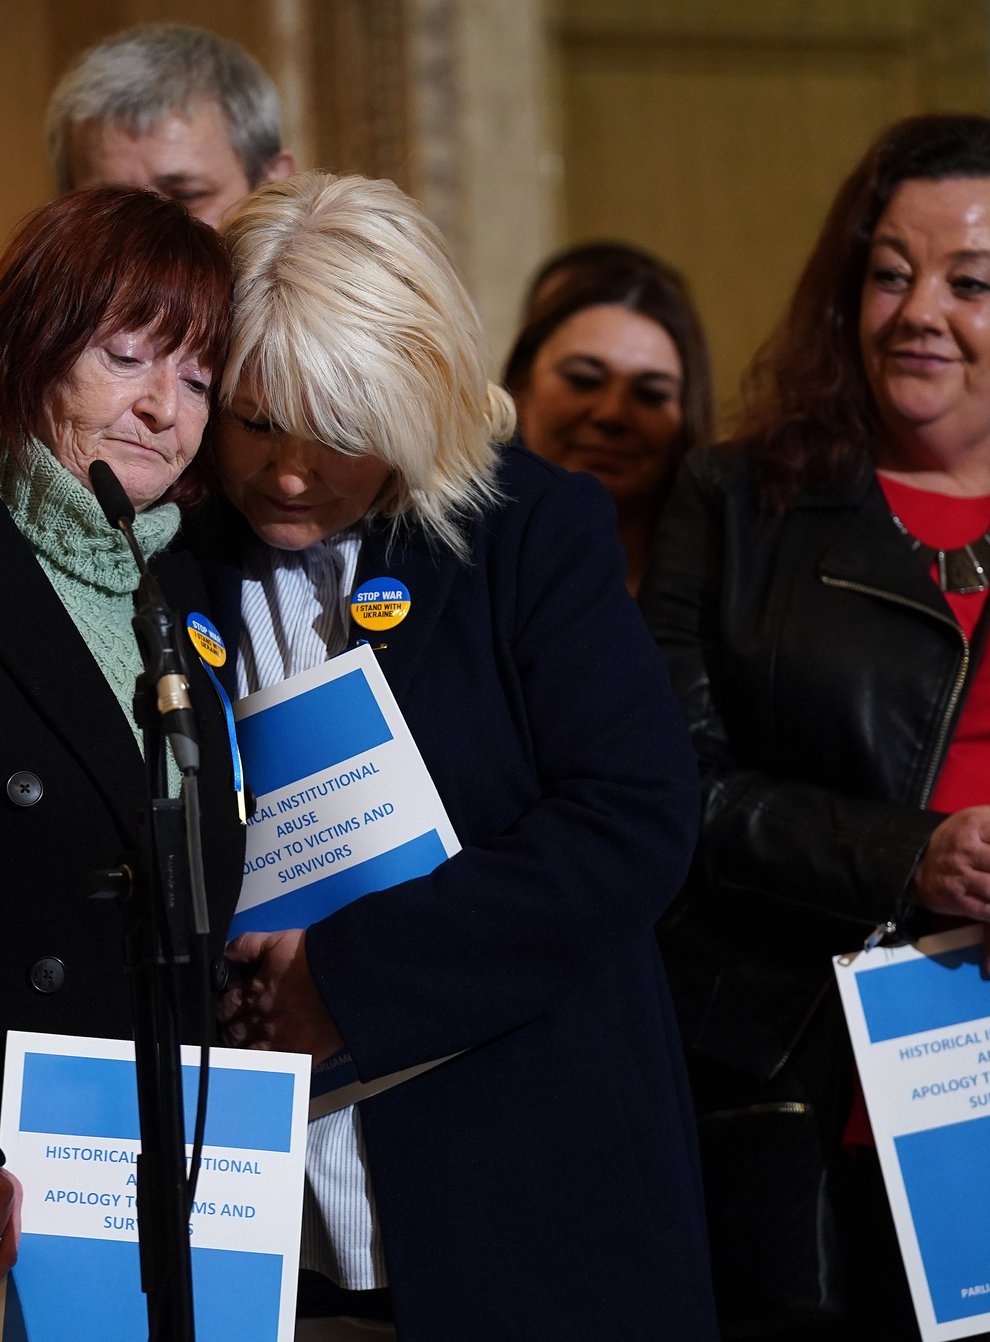 Kate Walmsley (left) and Margaret McGuckin (centre) react to the long-awaited public apology to victims of historical institutional abuse (Brian Lawless/PA)